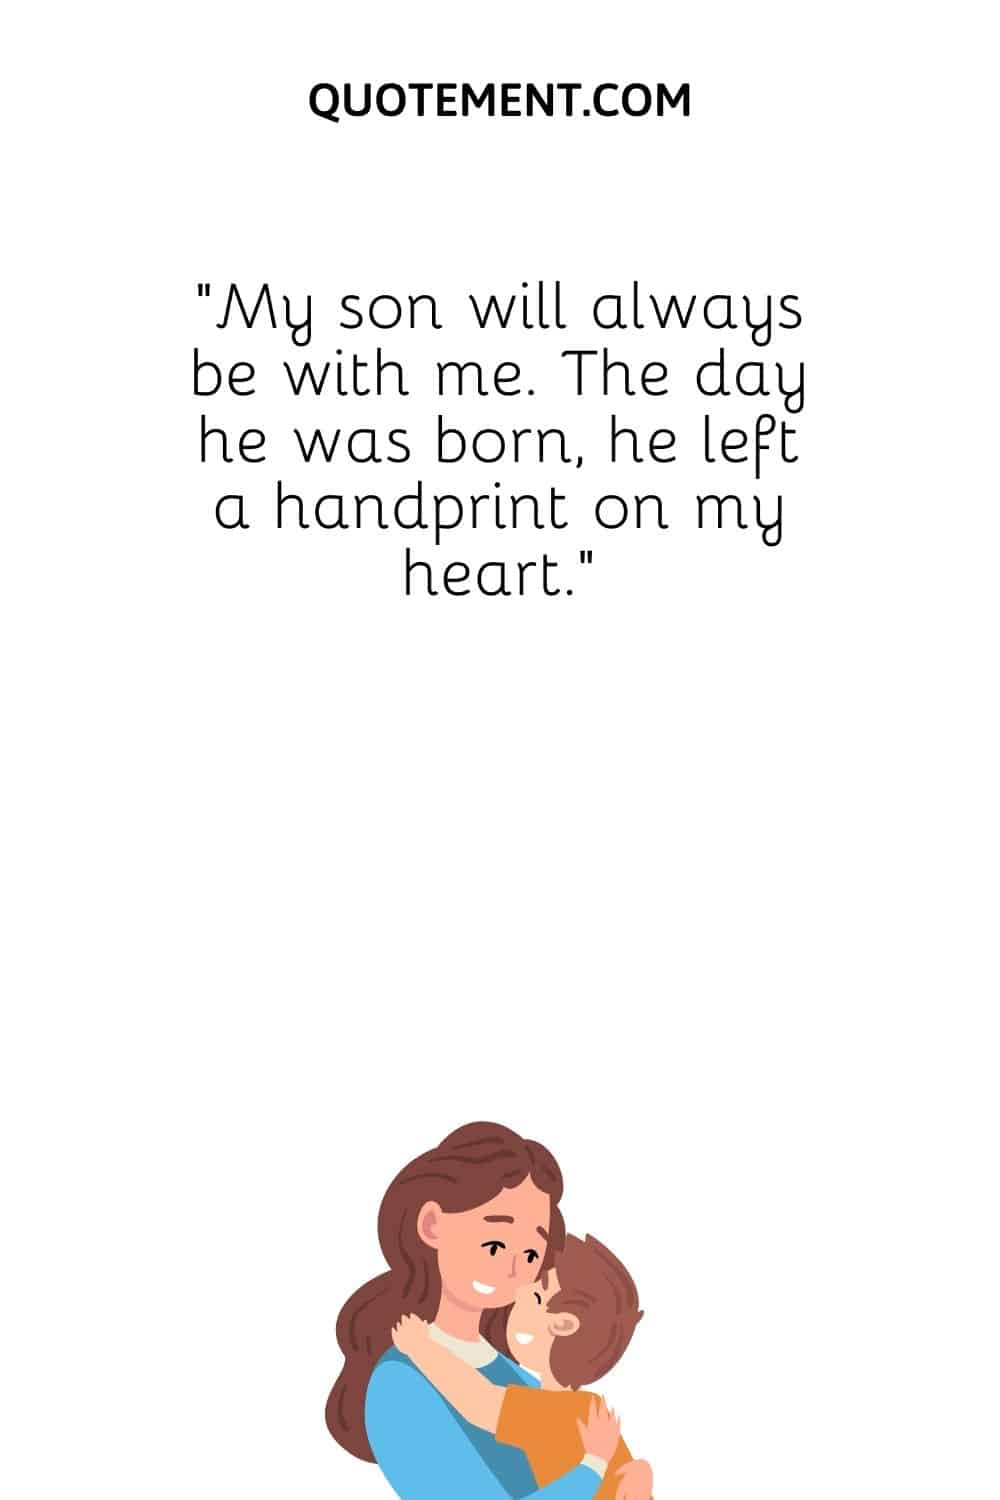 My son will always be with me.